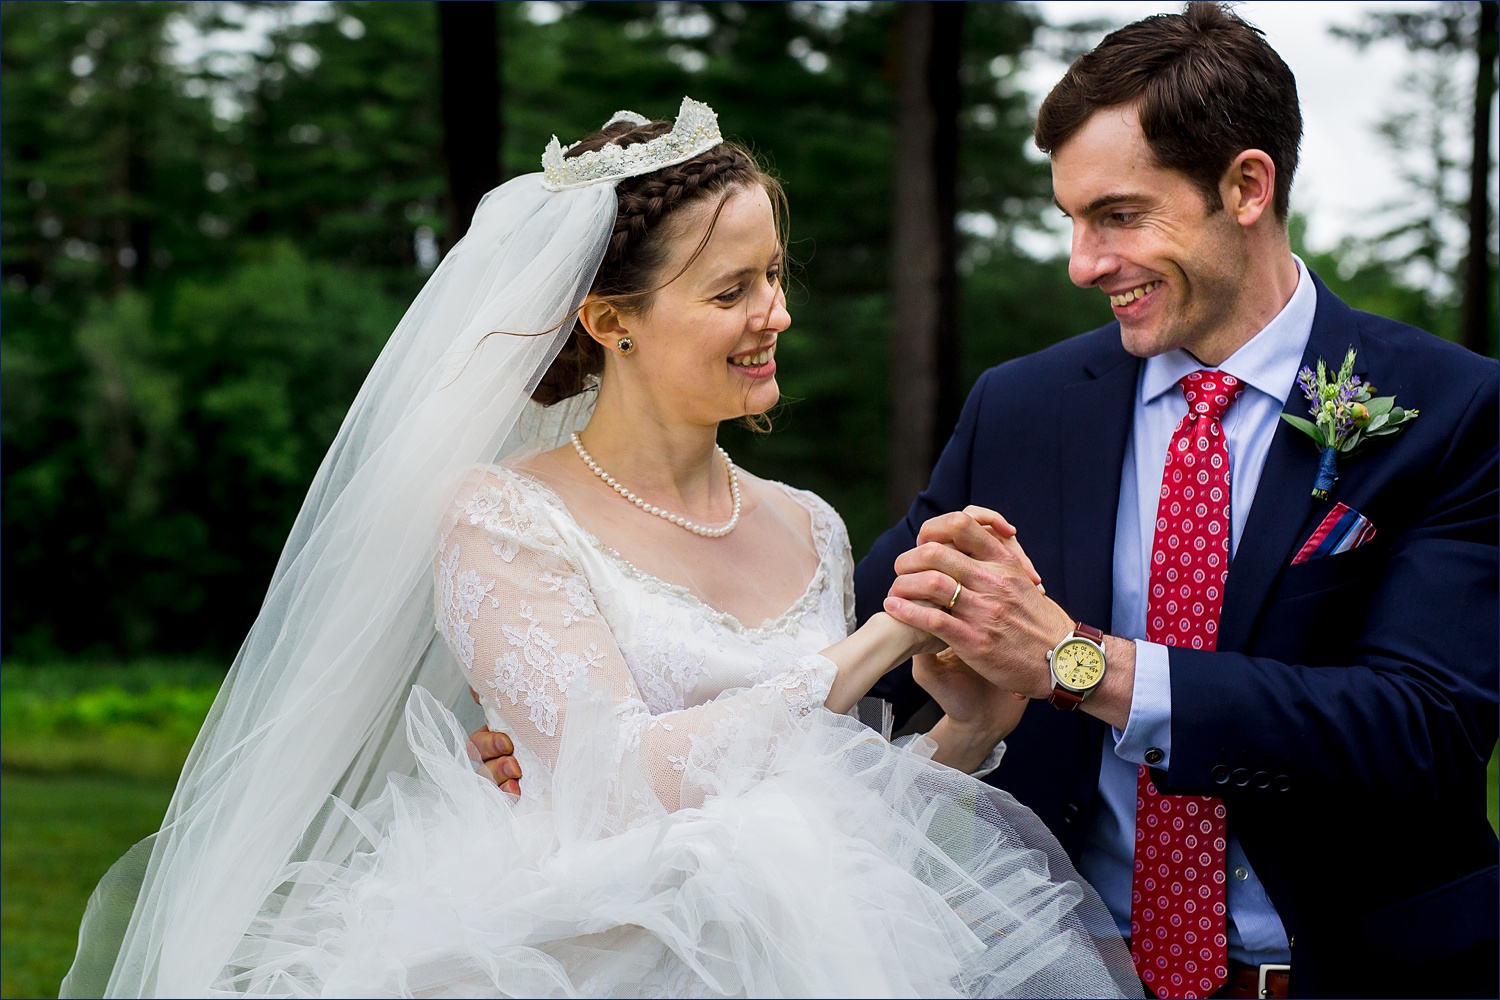 The bride and groom dance together in New Hampshire